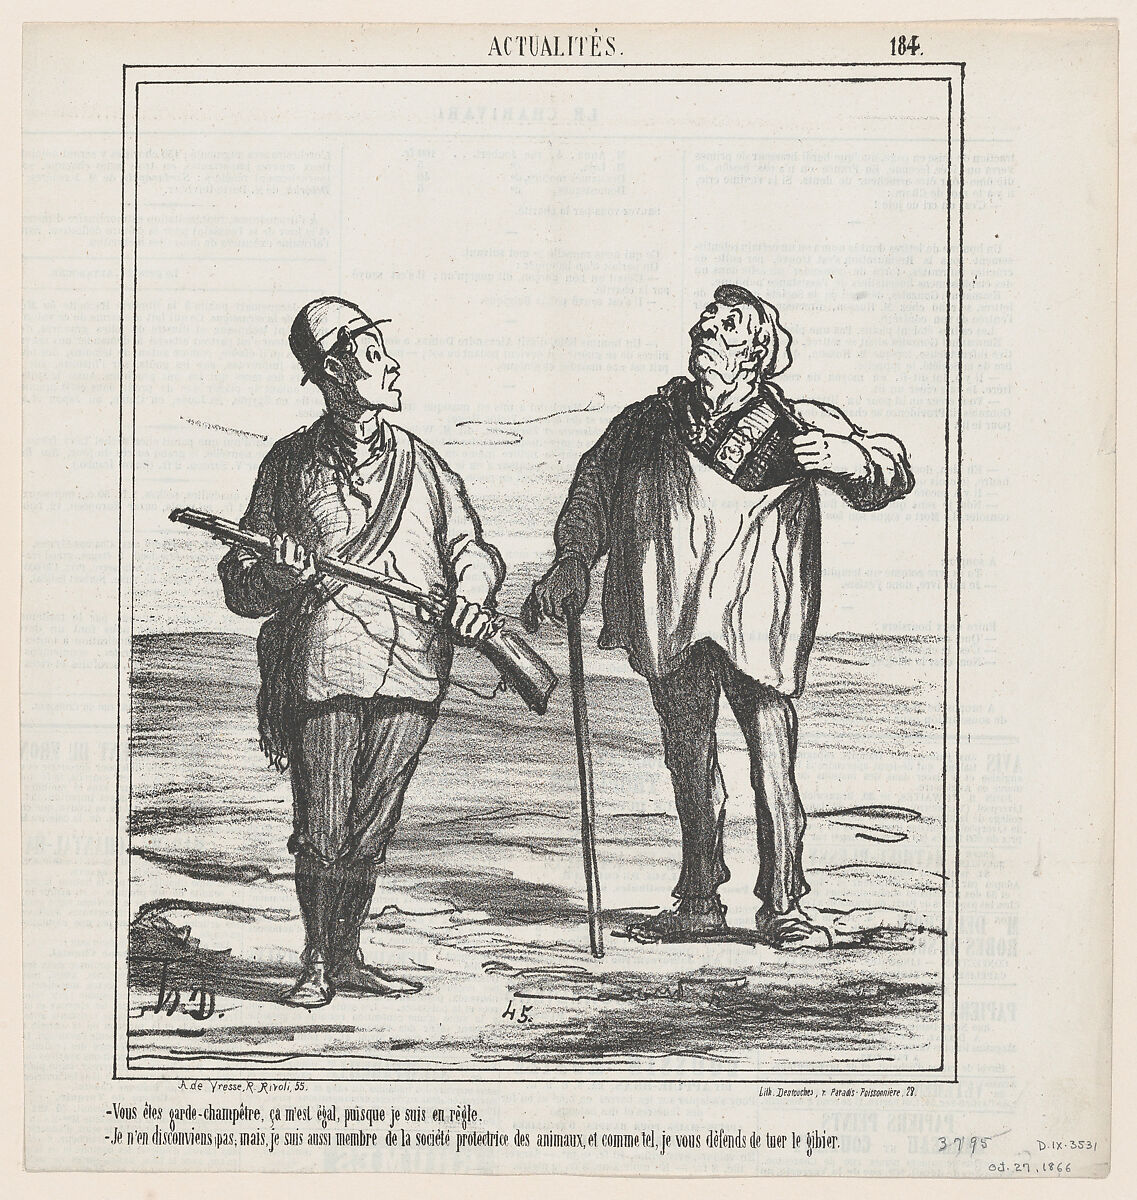 You are a warden, it is all right for me since I have a license, from 'News of the day,' published in Le Charivari, October 27, 1866, Honoré Daumier (French, Marseilles 1808–1879 Valmondois), Lithograph on newsprint; second state of two (Delteil) 